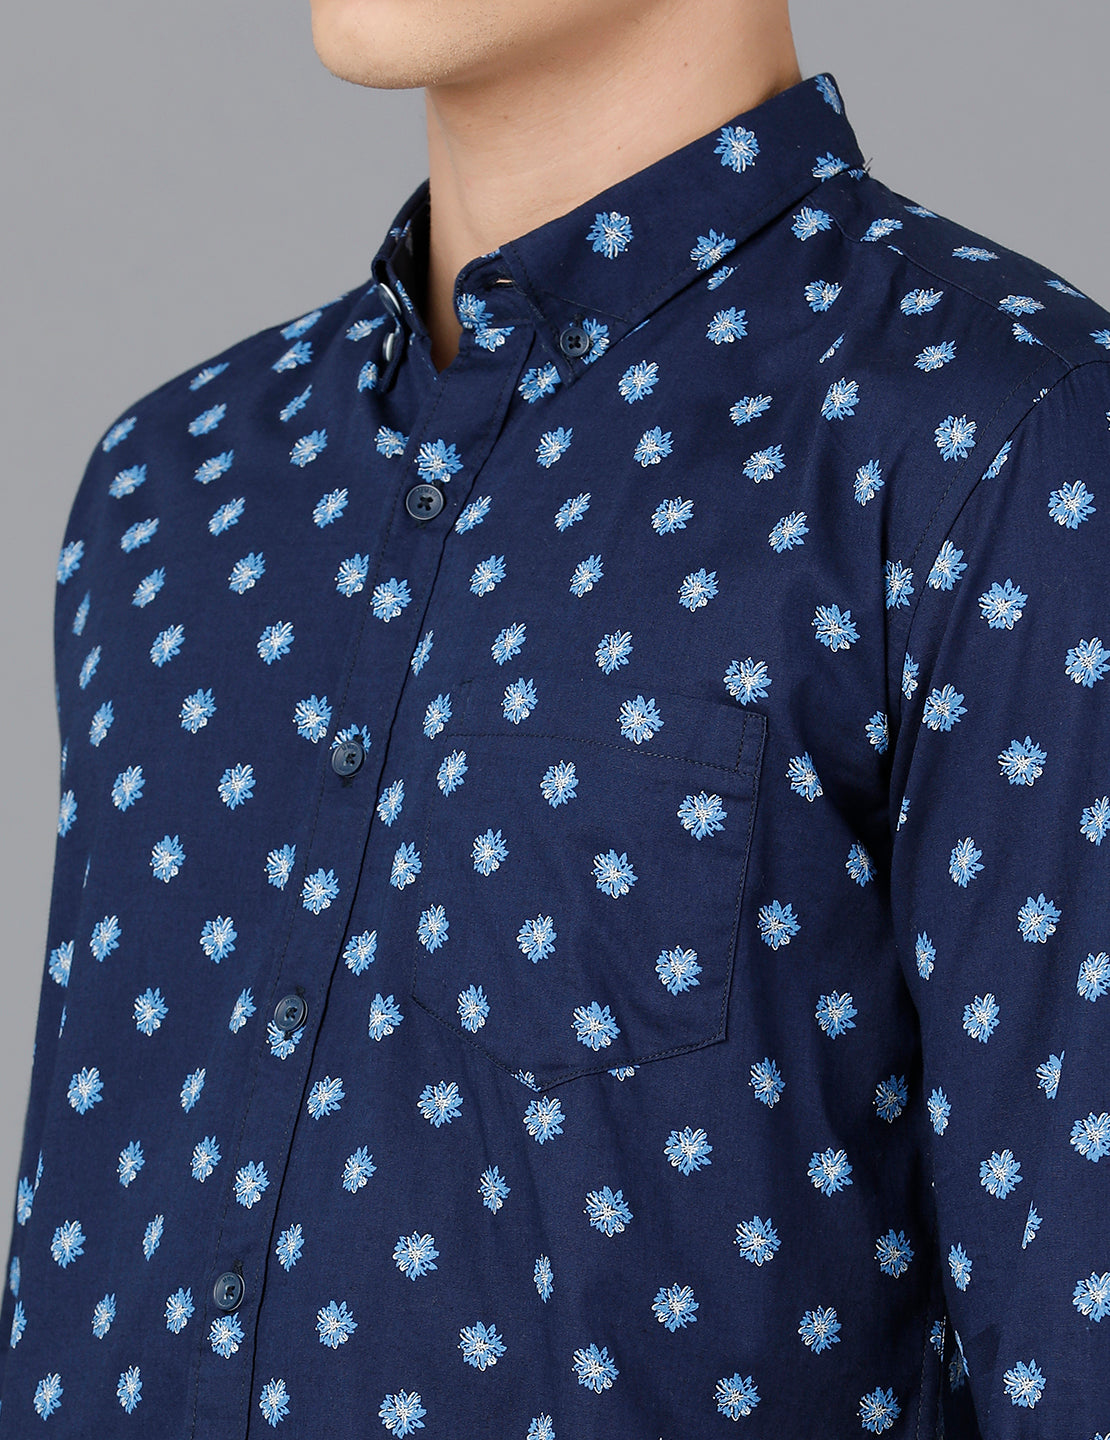 Printed shirts for men full sleeve